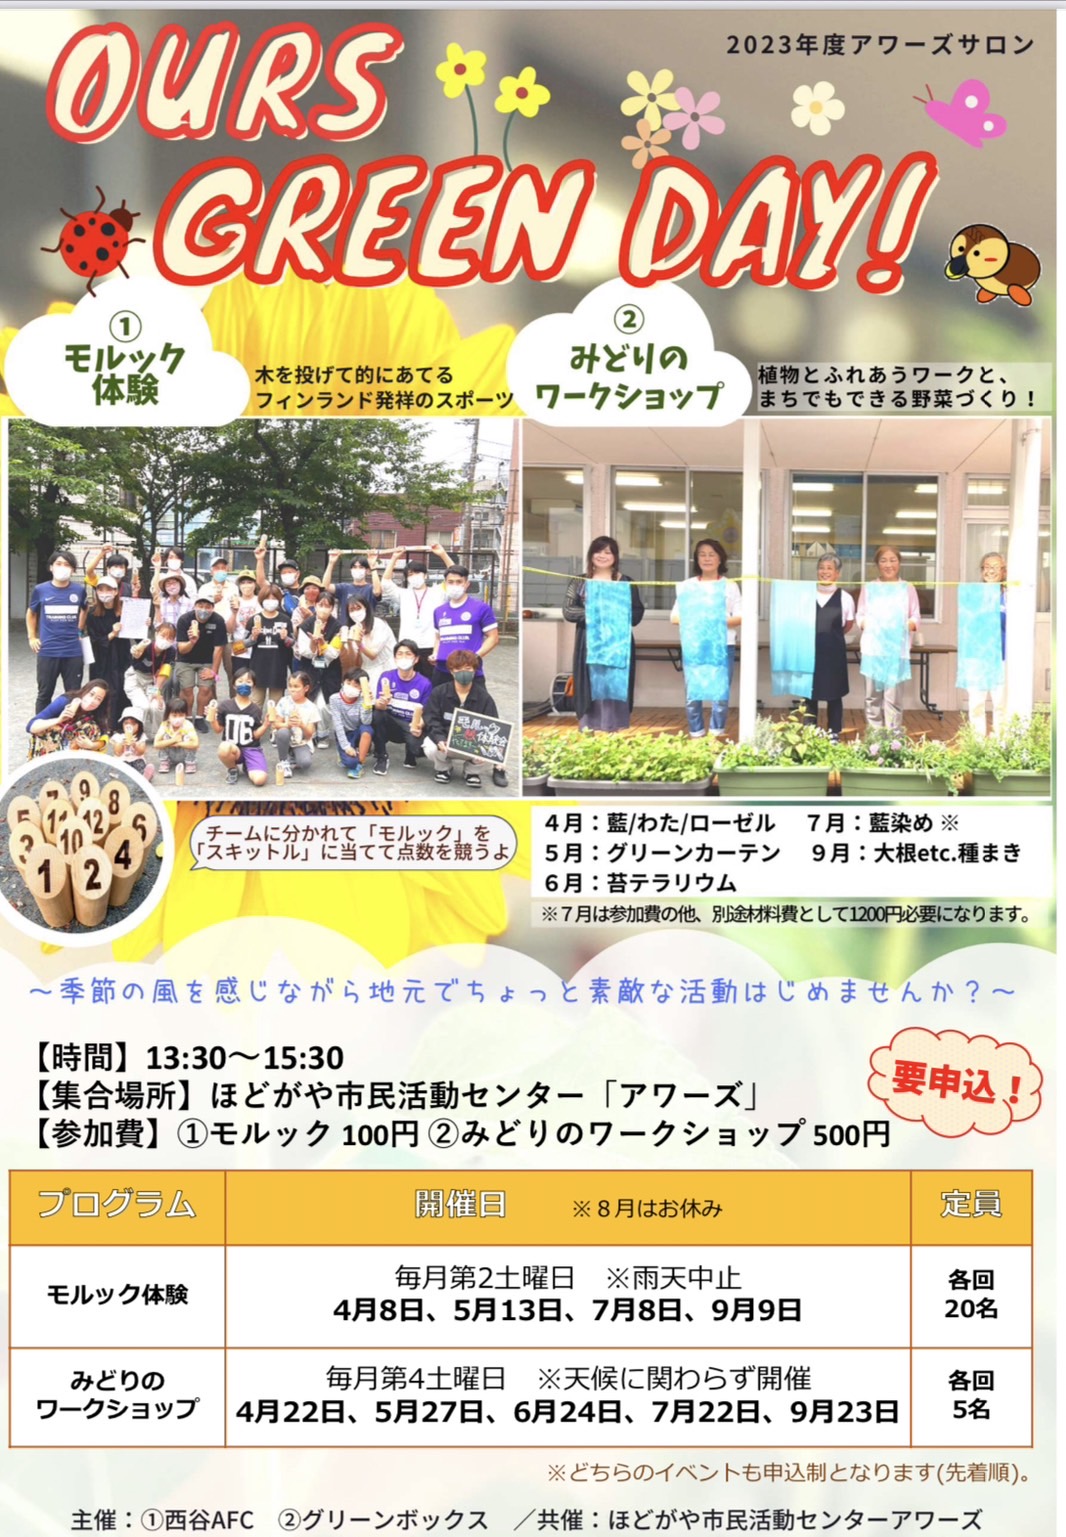 OURS GREEN DAY！　の画像